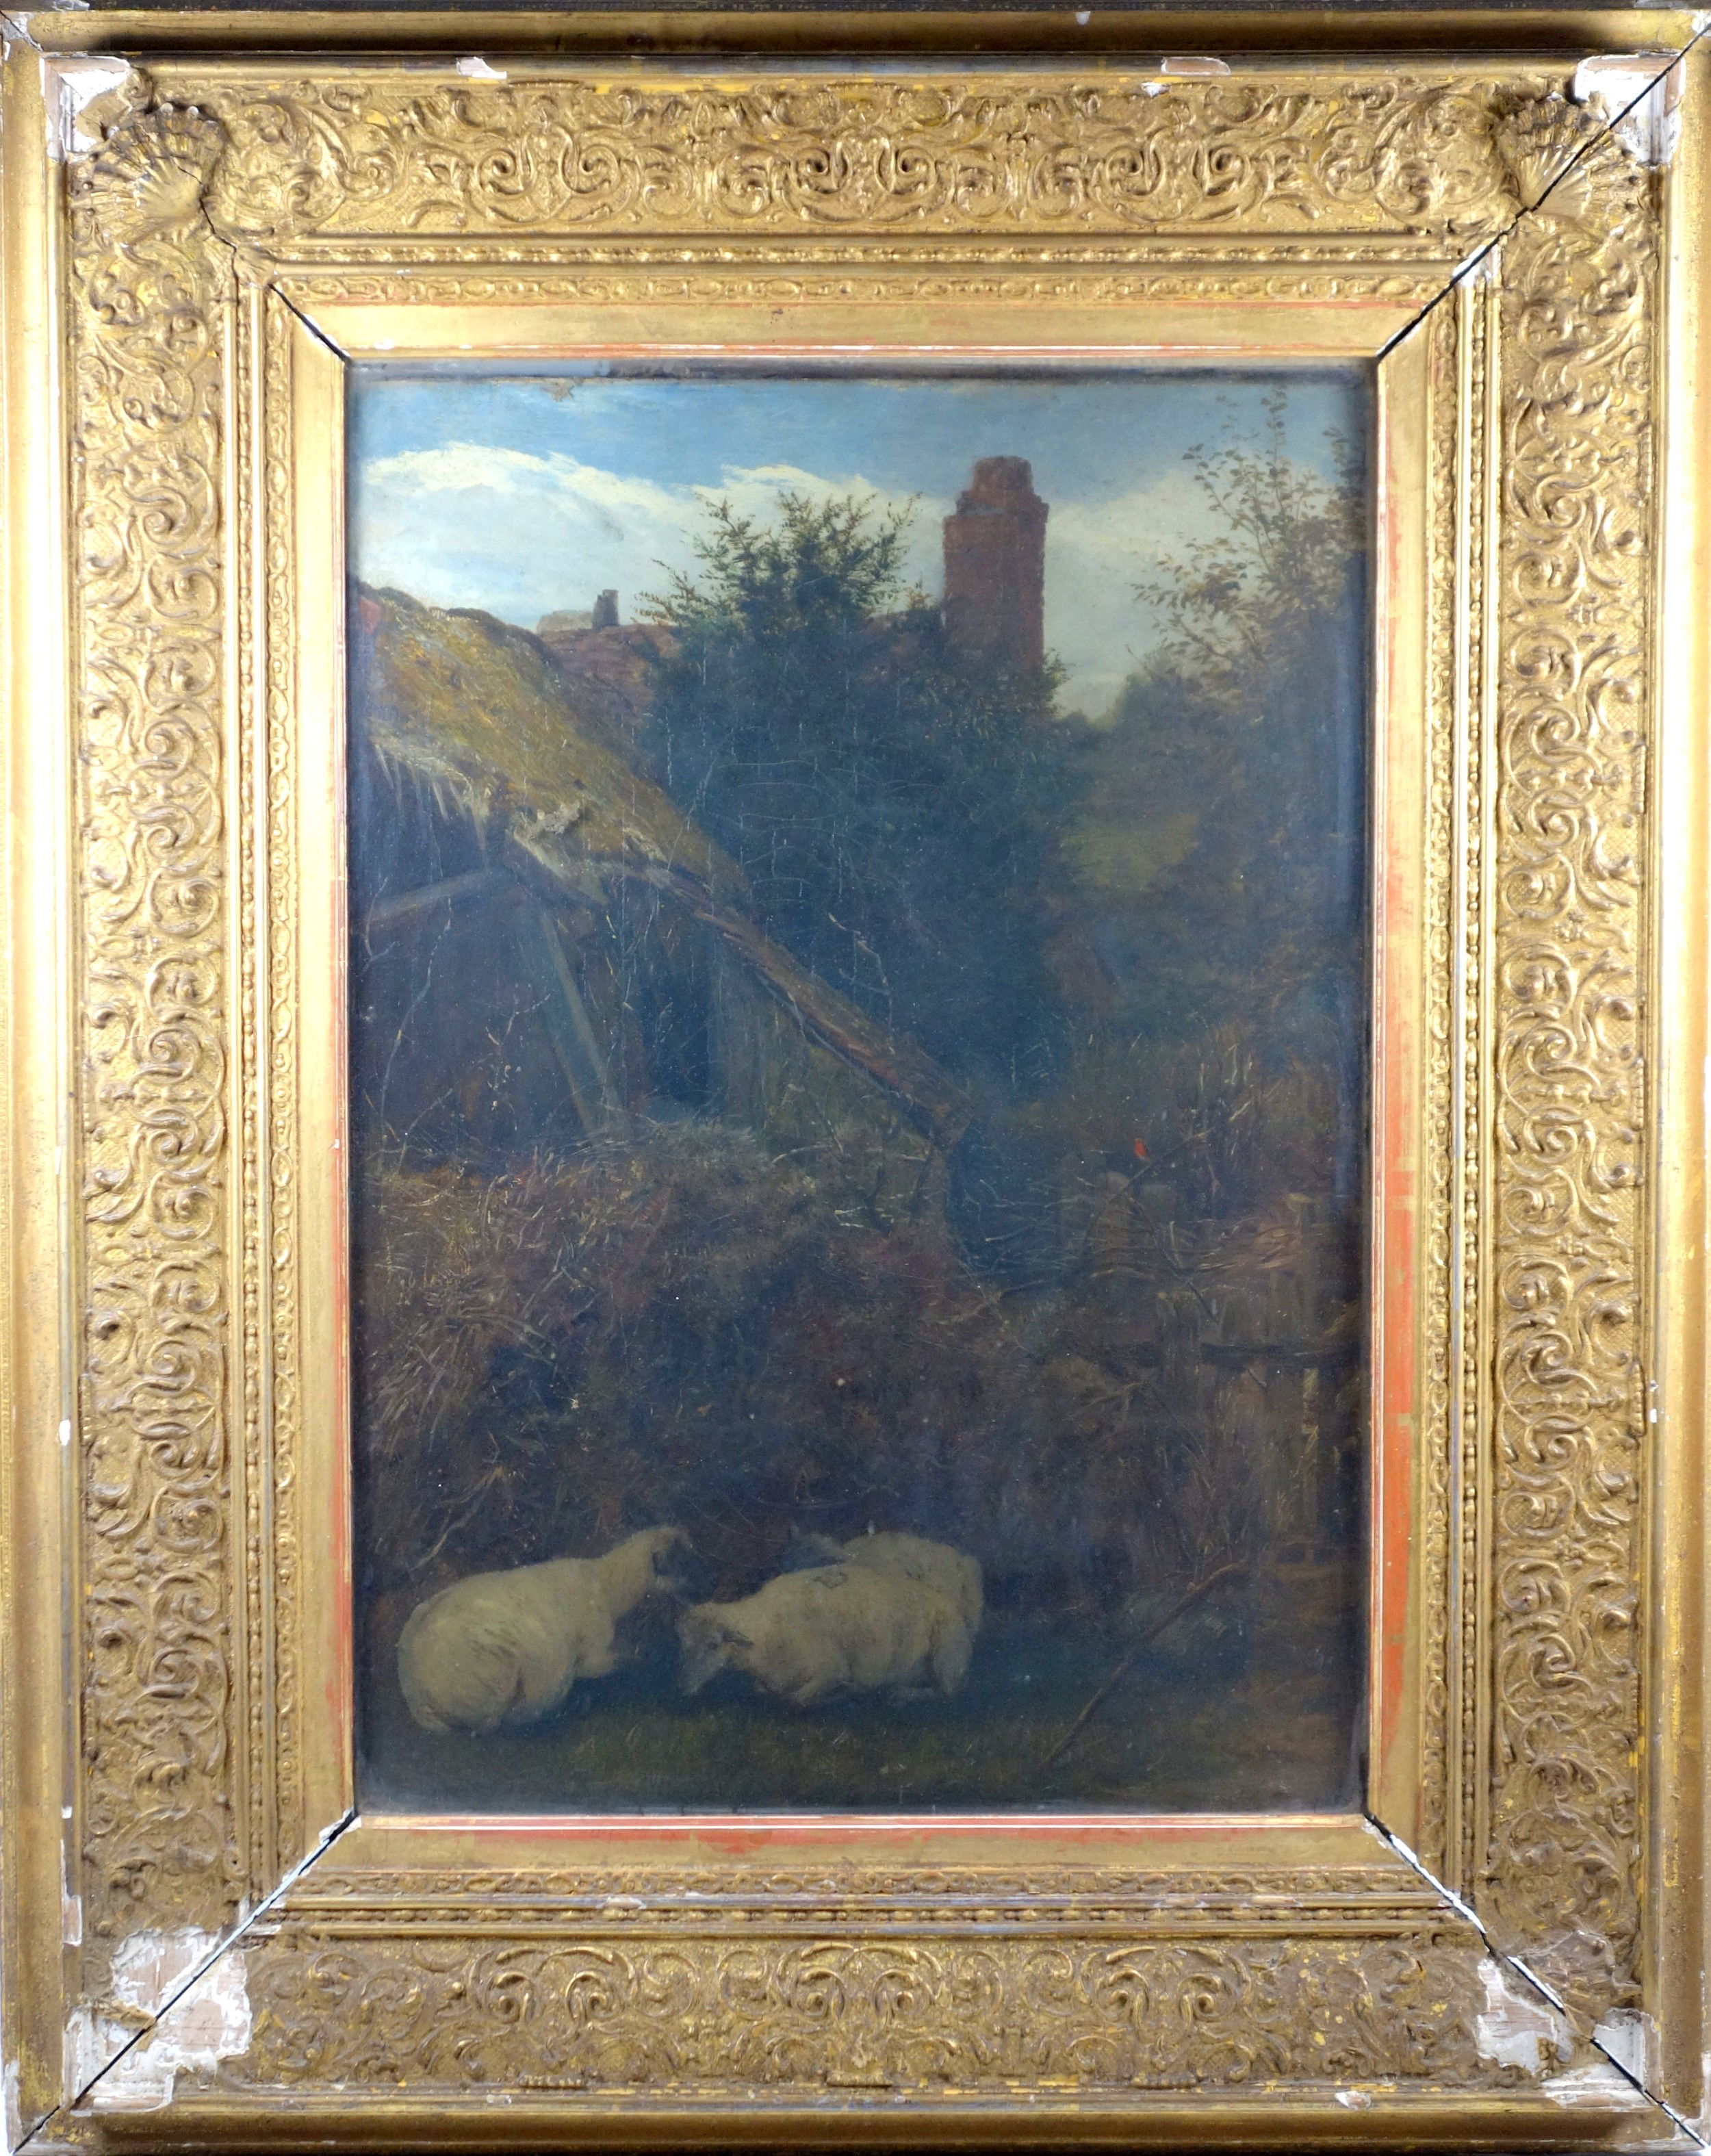 19th century English School ? Sheep resting in a ravine, an ancient ruin on the hill top, oil on